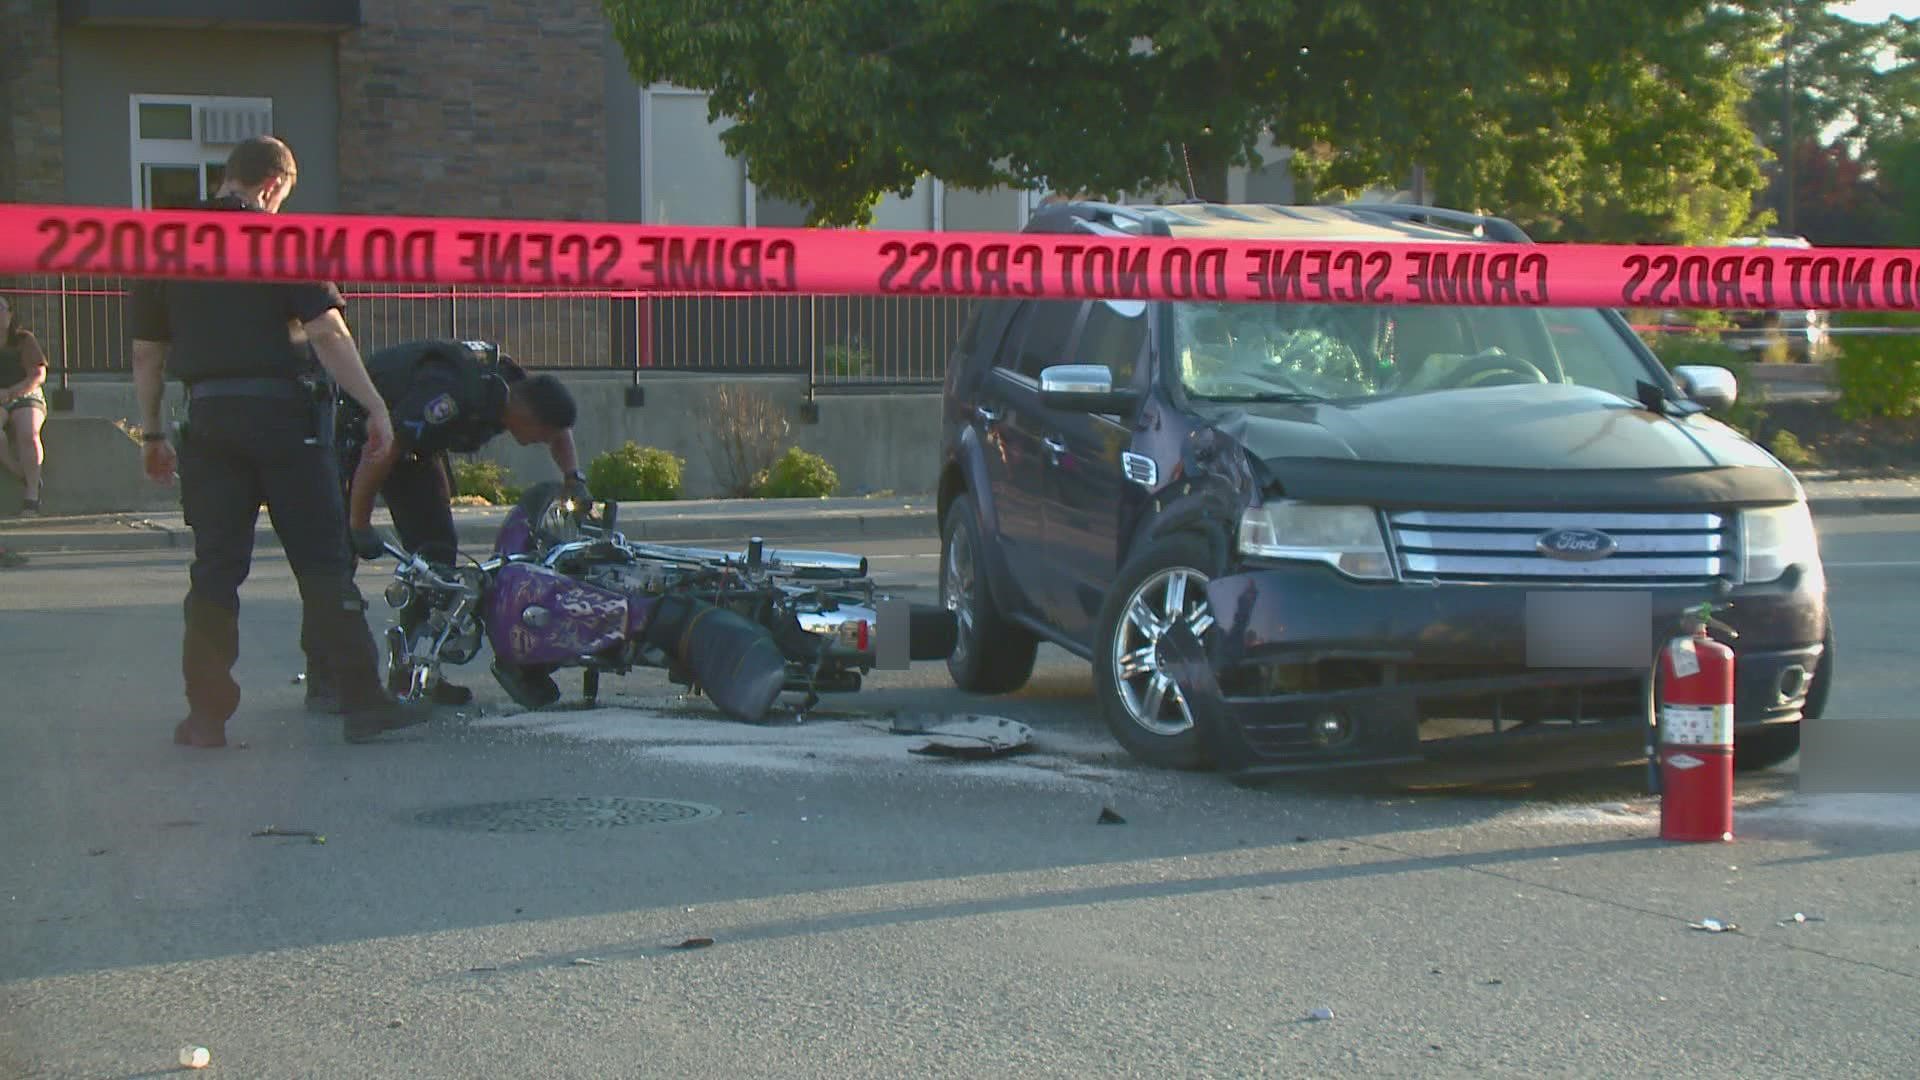 The accident involving a motorcycle and car left one dead and another with potentially life-threatening injuries, according to Spokane police.